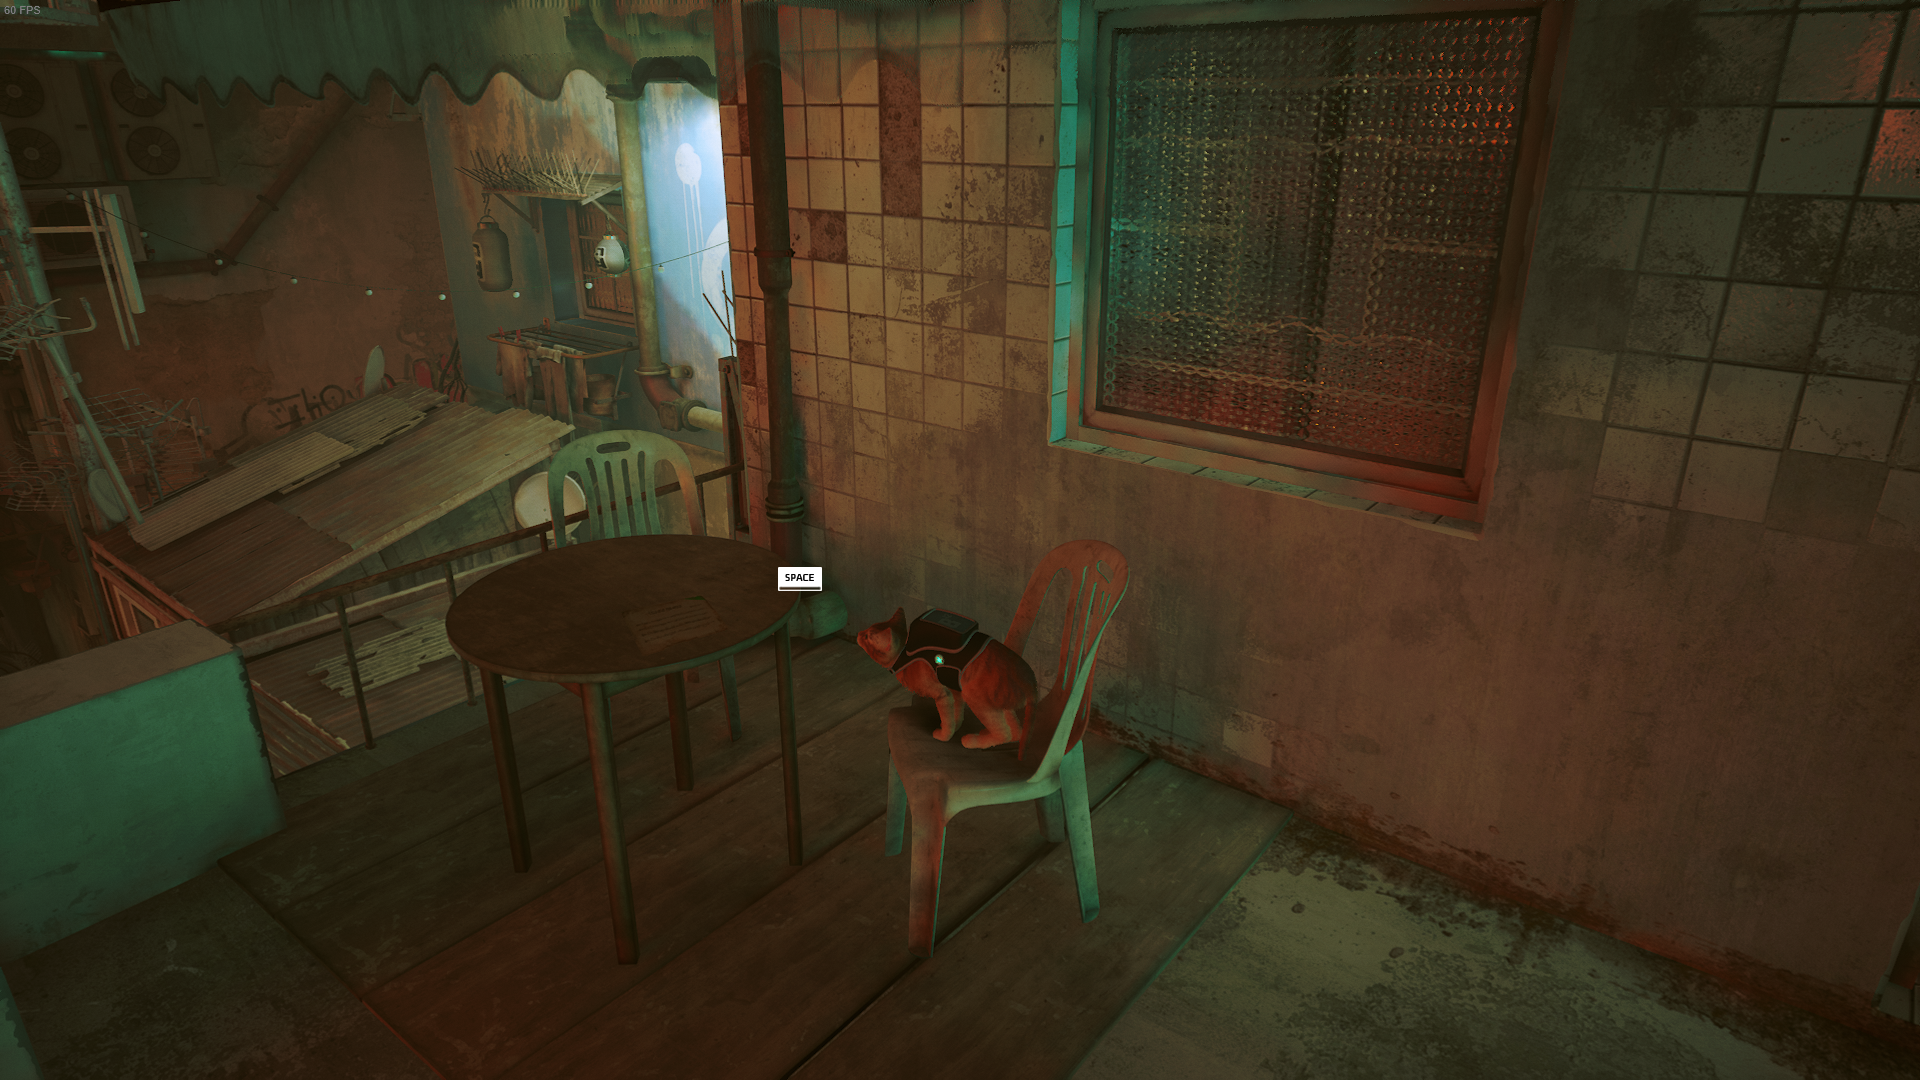 The Outsider of Stray looks at a piece of Sheet Music on a table outside of Clementine's flat.